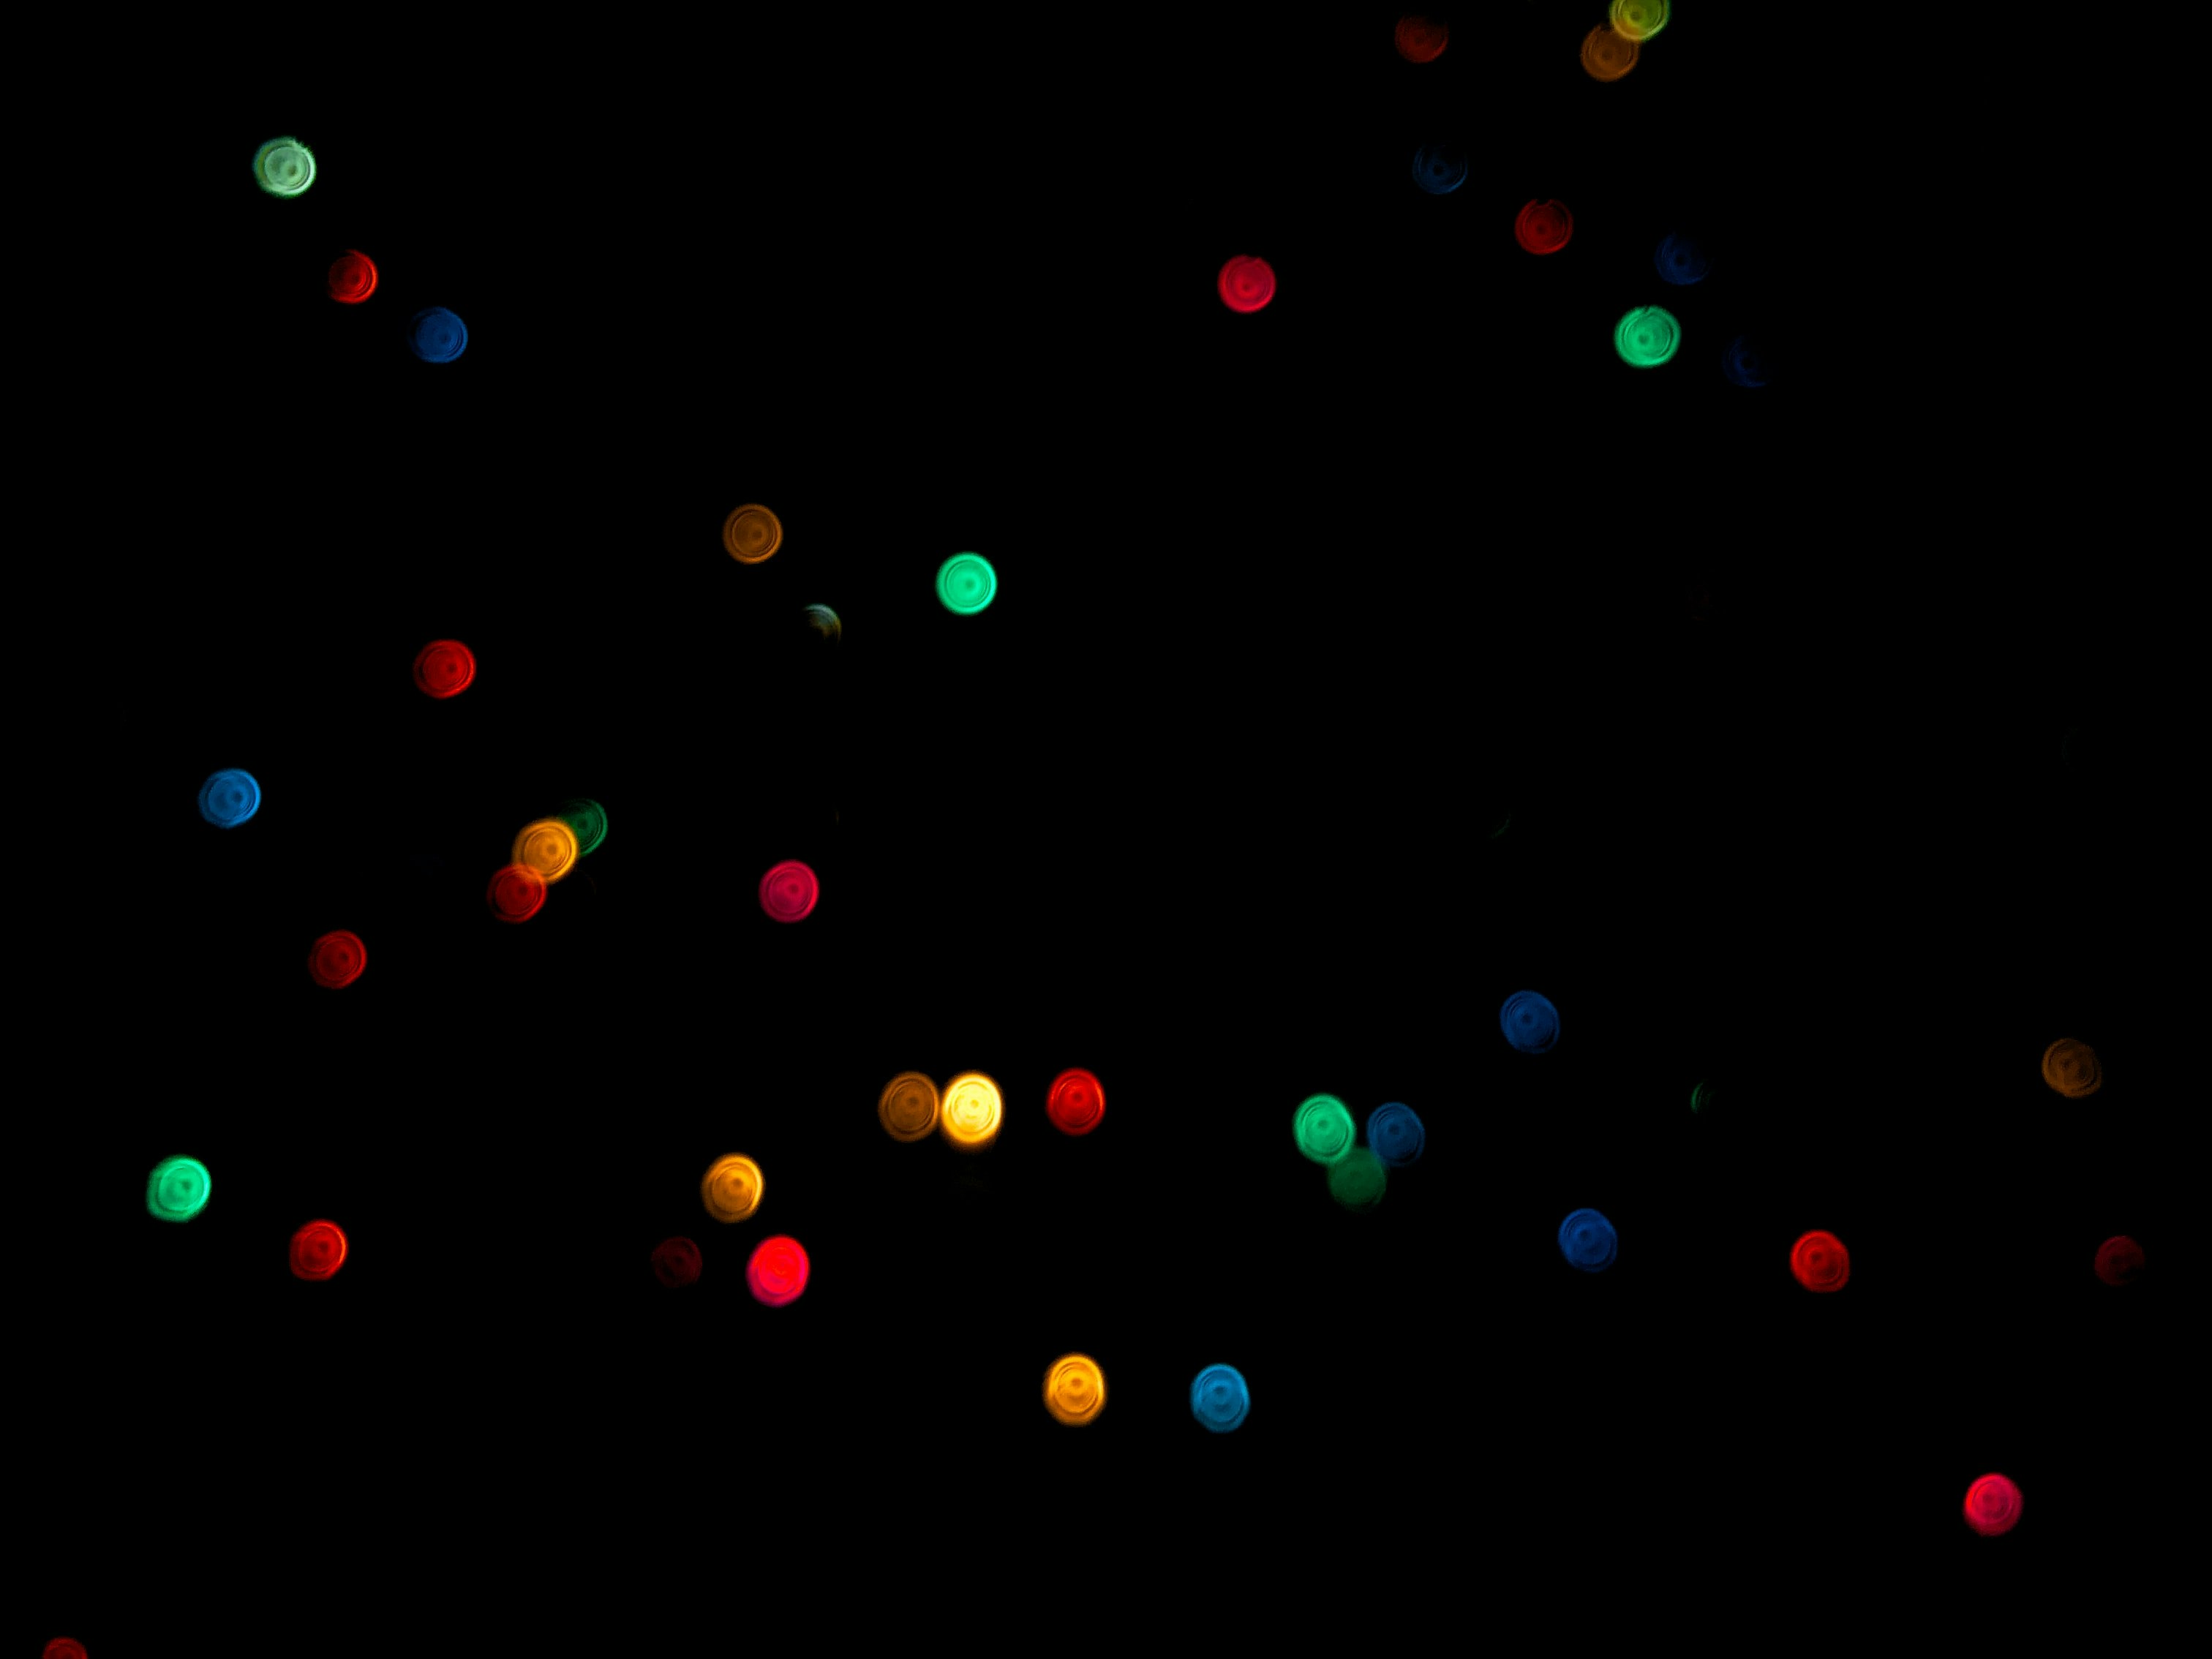 brightly colored green, red, blue, and yellow dots against a black background